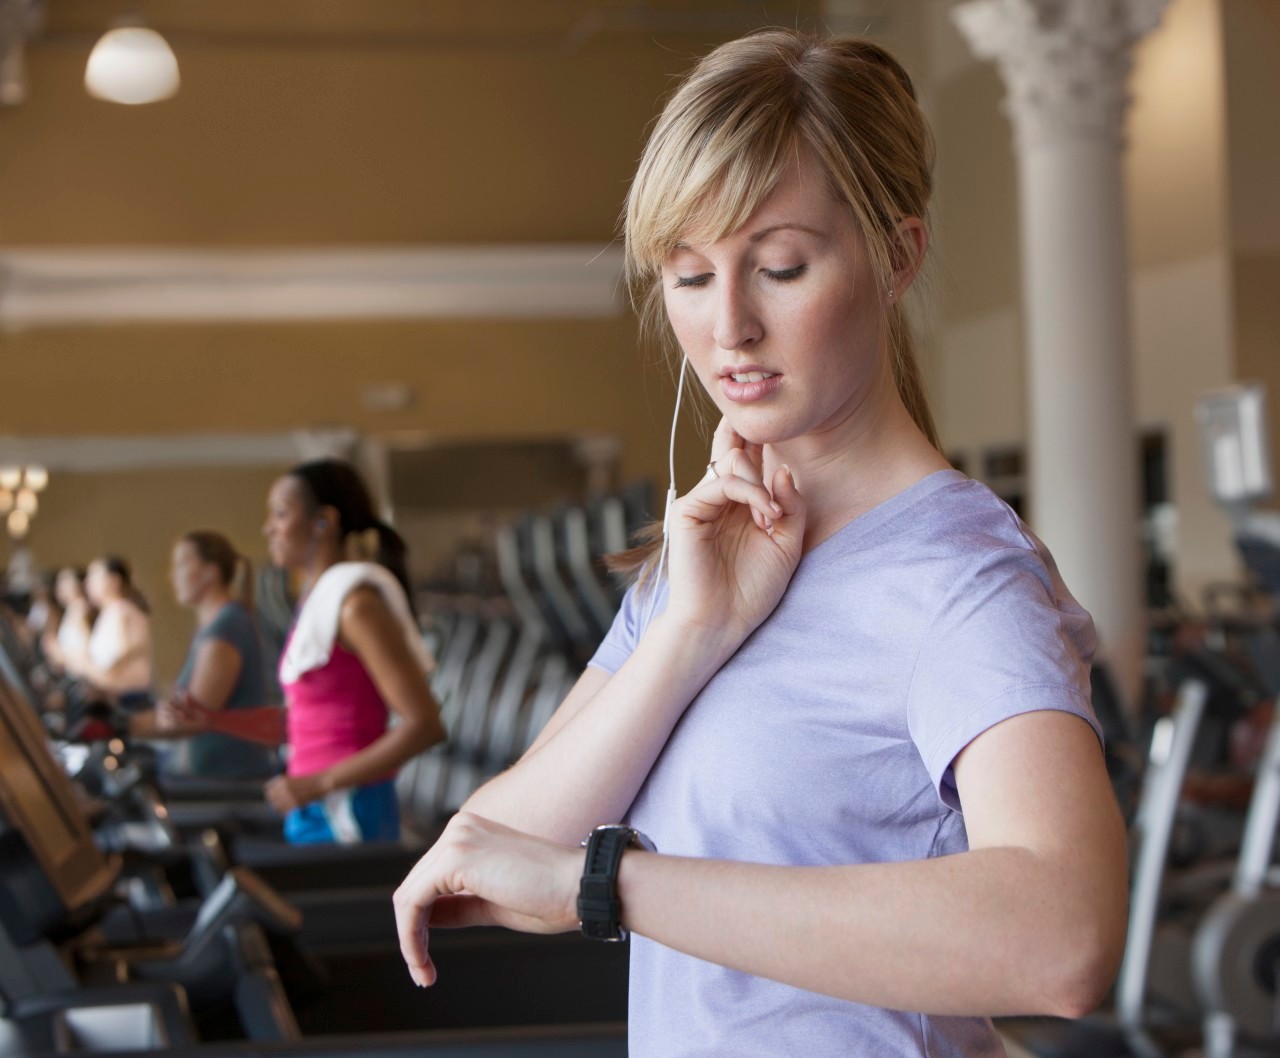 11 May 2012 --- Caucasian woman checking pulse in gym --- Image by © Jose Luis Pelaez Inc/Blend Images/Corbis